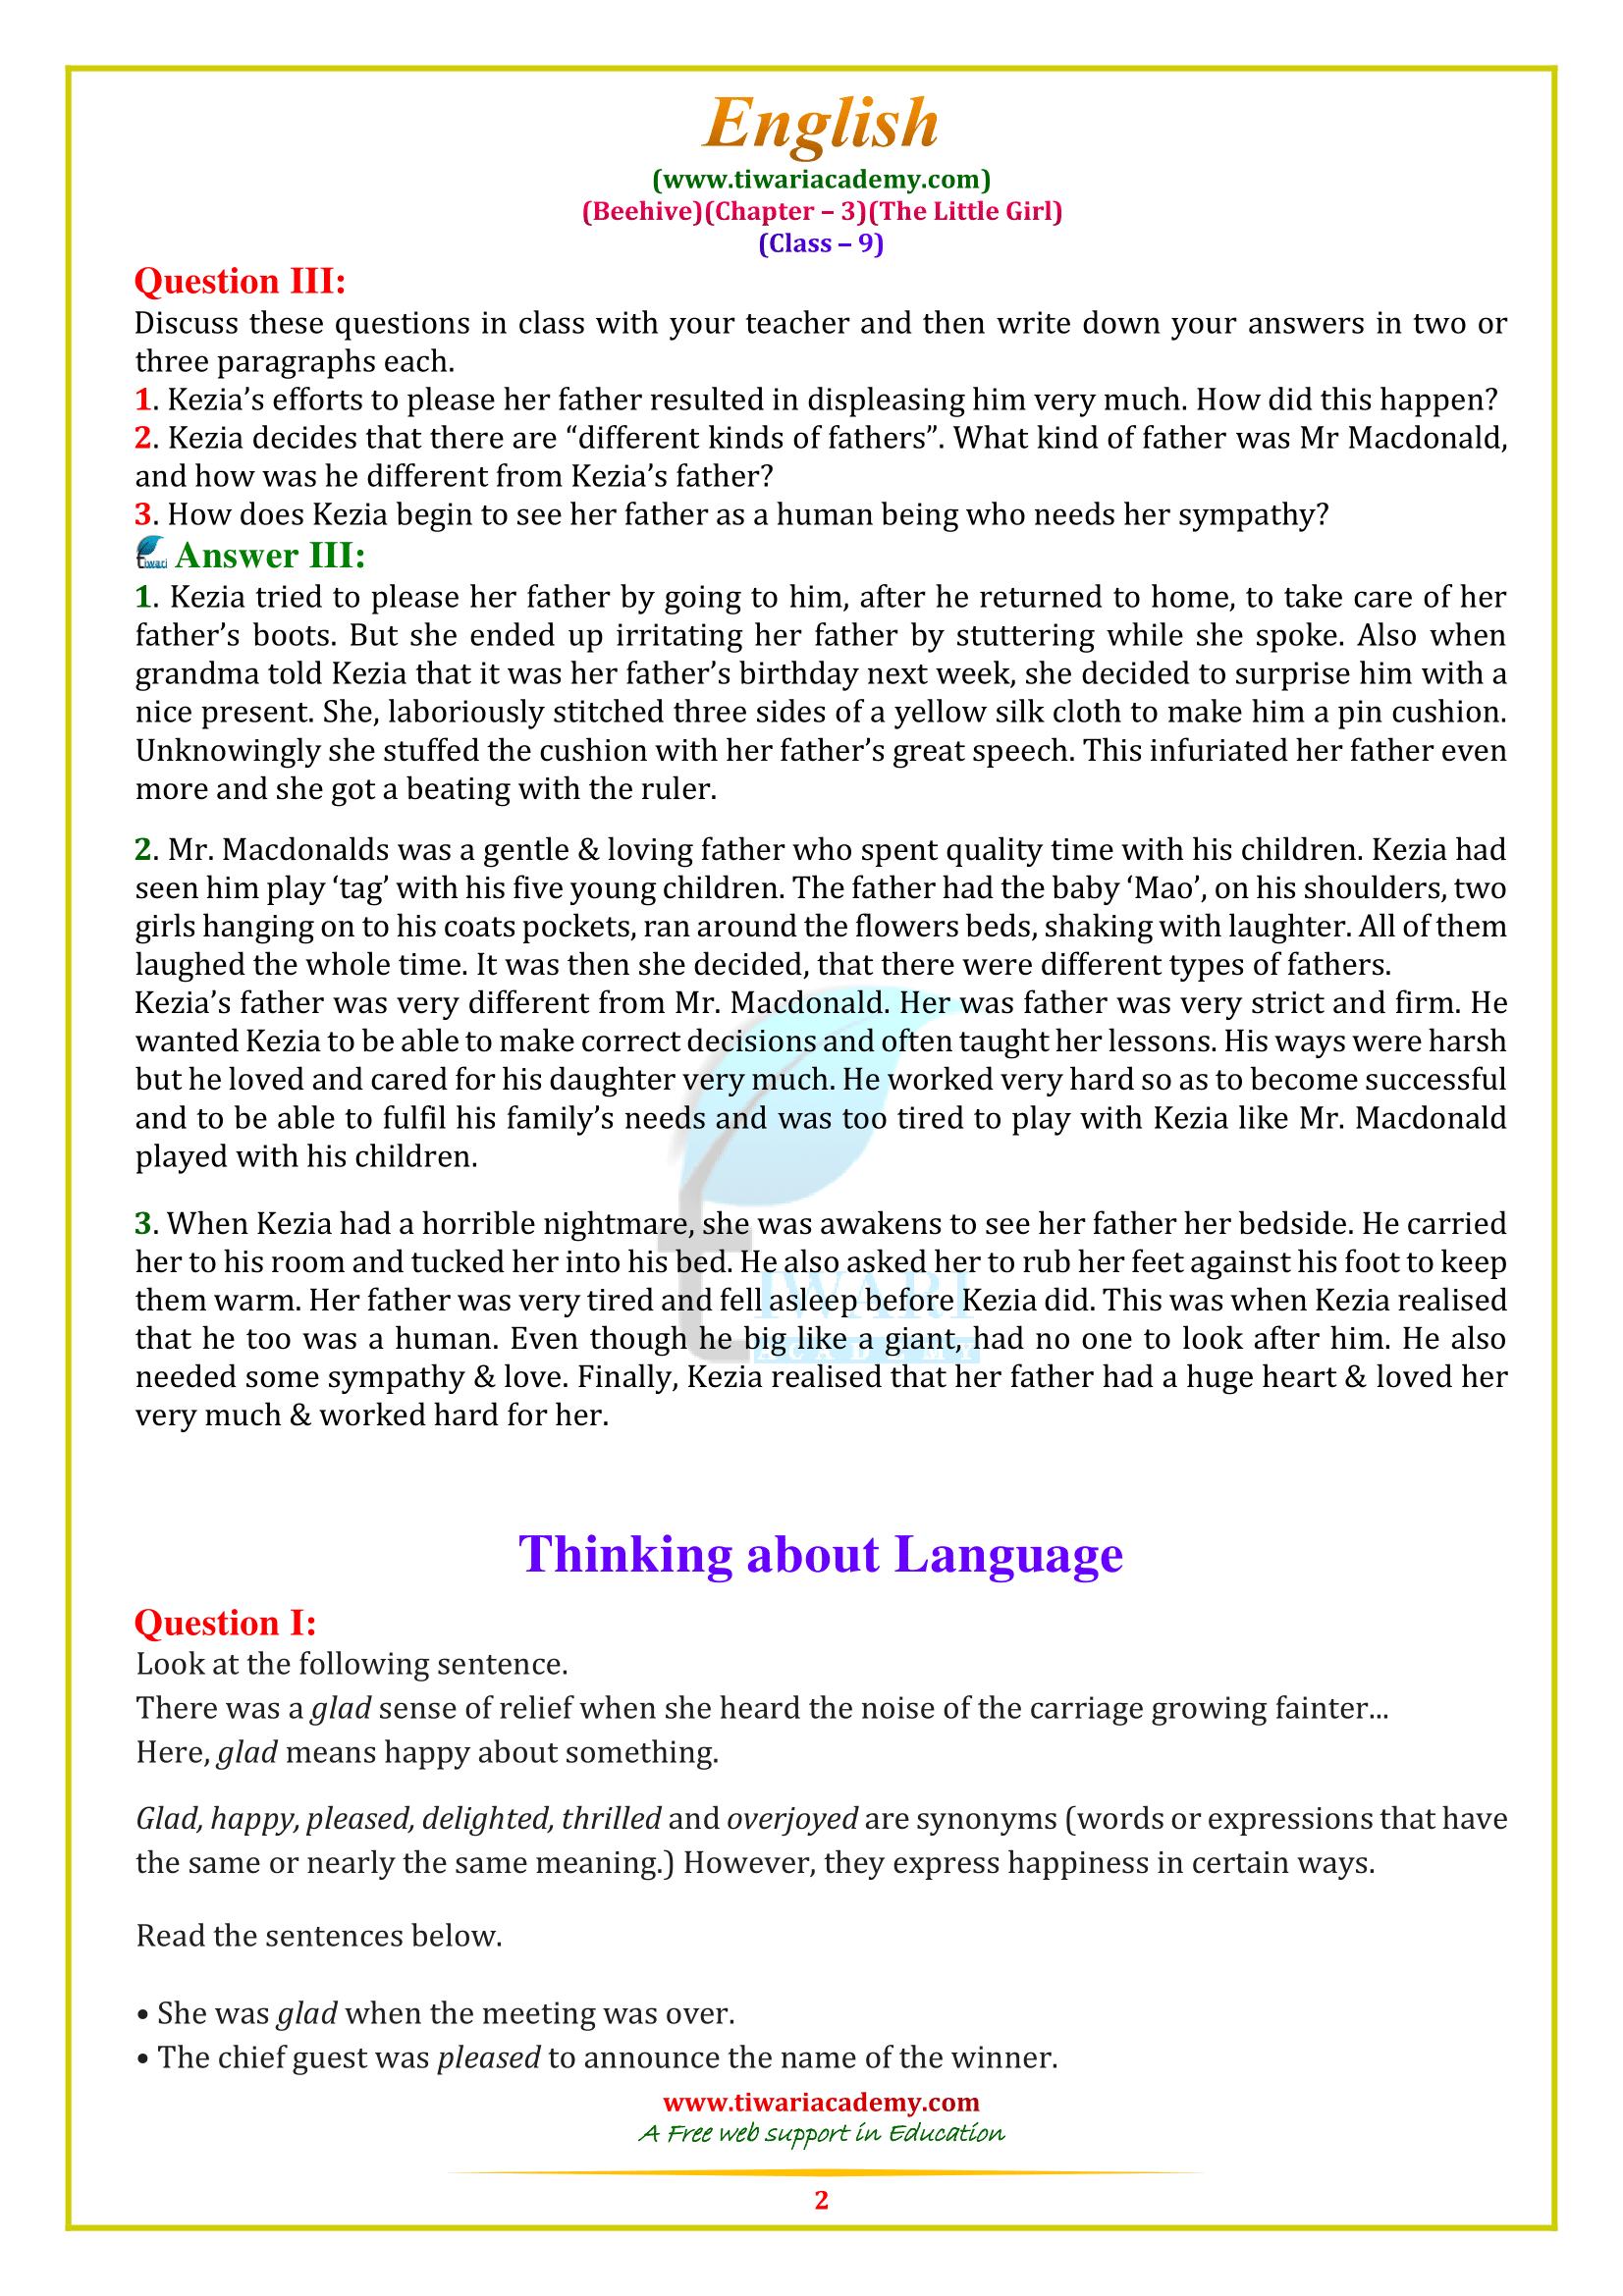 NCERT Solutions for Class 9 English Beehive Chapter 3 in PDF form